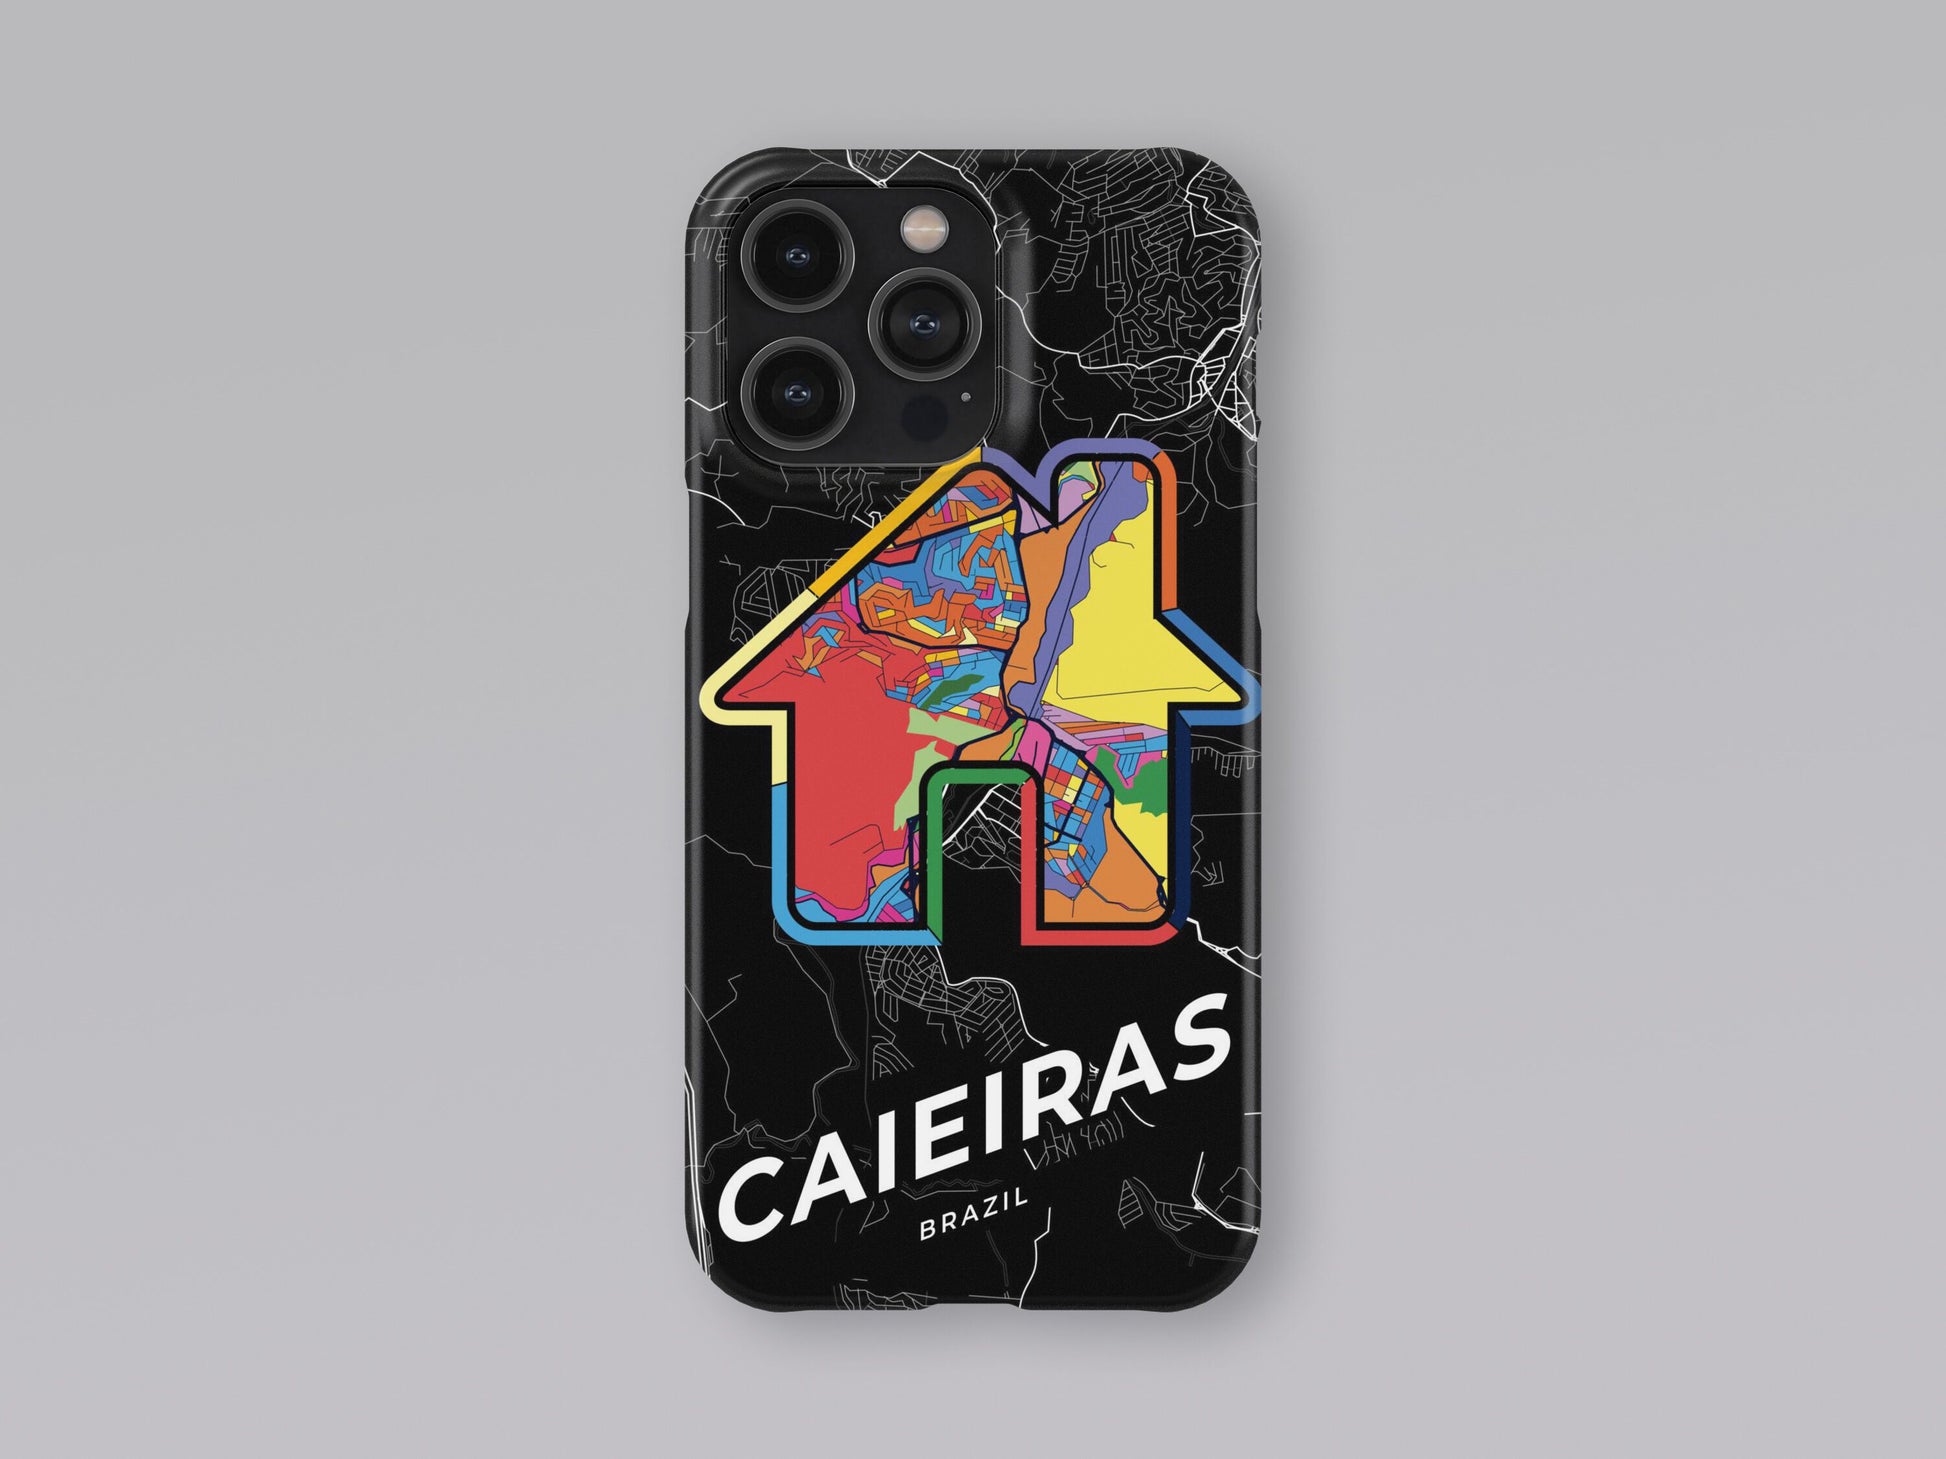 Caieiras Brazil slim phone case with colorful icon. Birthday, wedding or housewarming gift. Couple match cases. 3